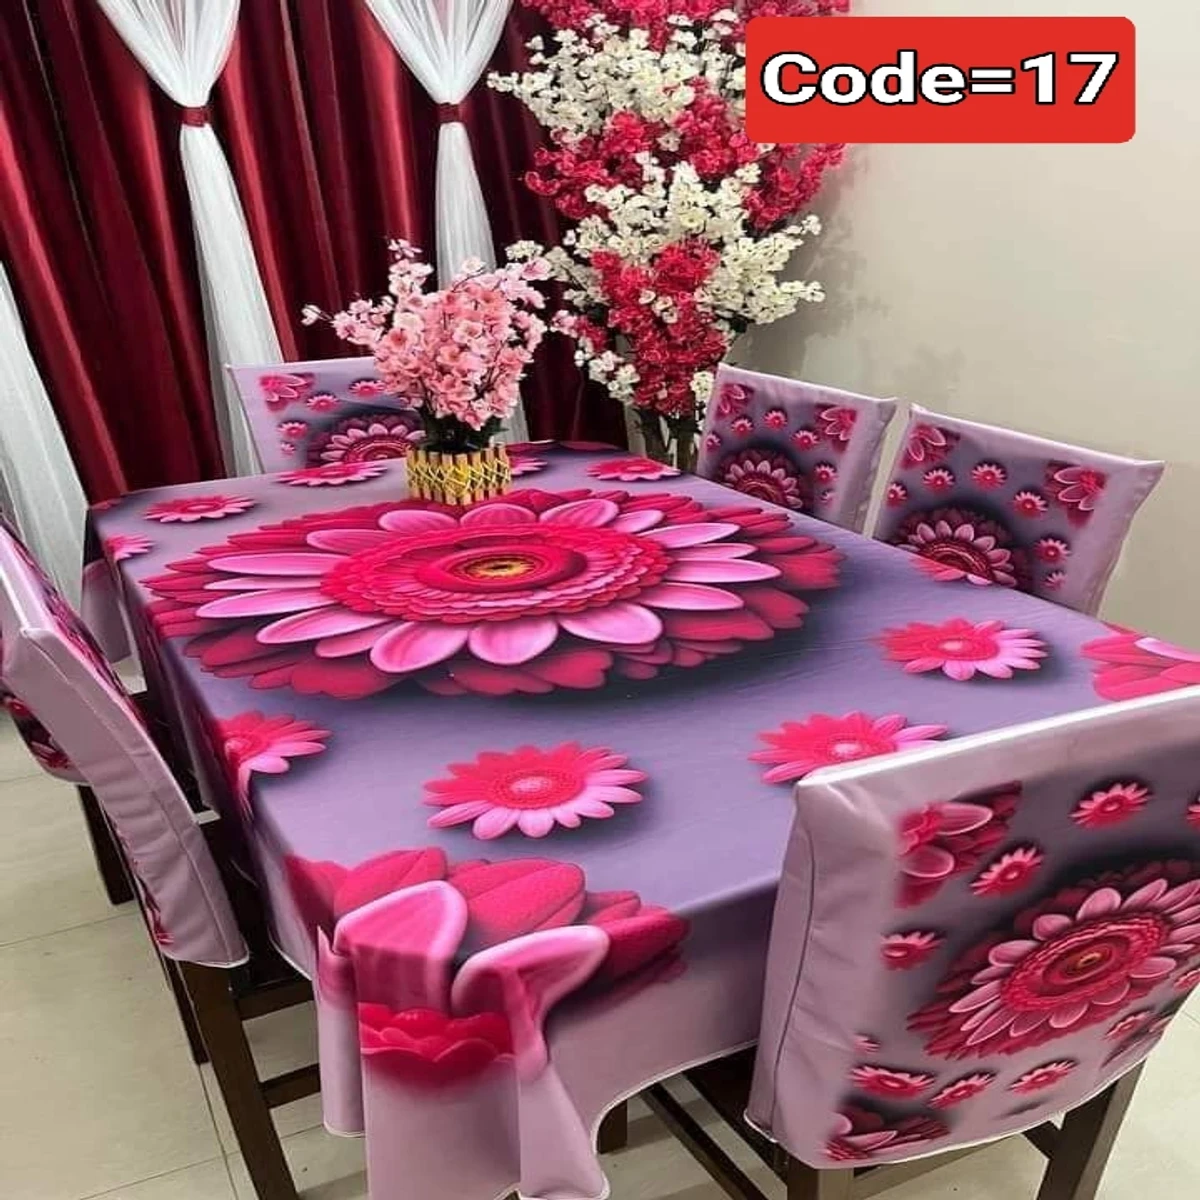 3D Pint Dining Table and Chair Cover Code=17